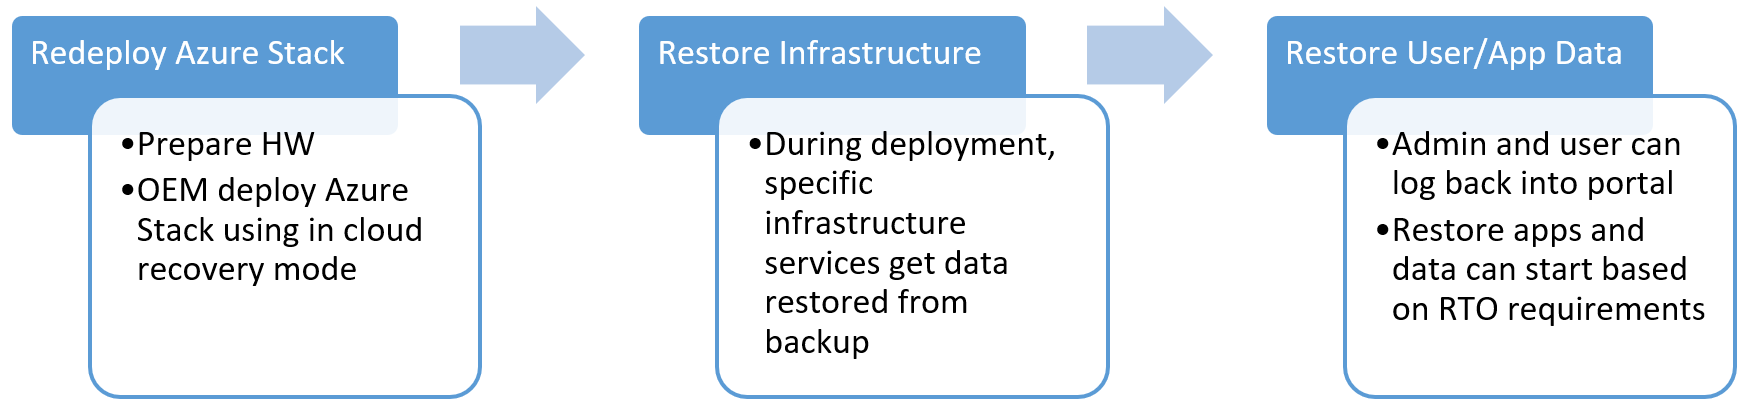 Azure Stack Hub data recovery workflow -- Redeployment